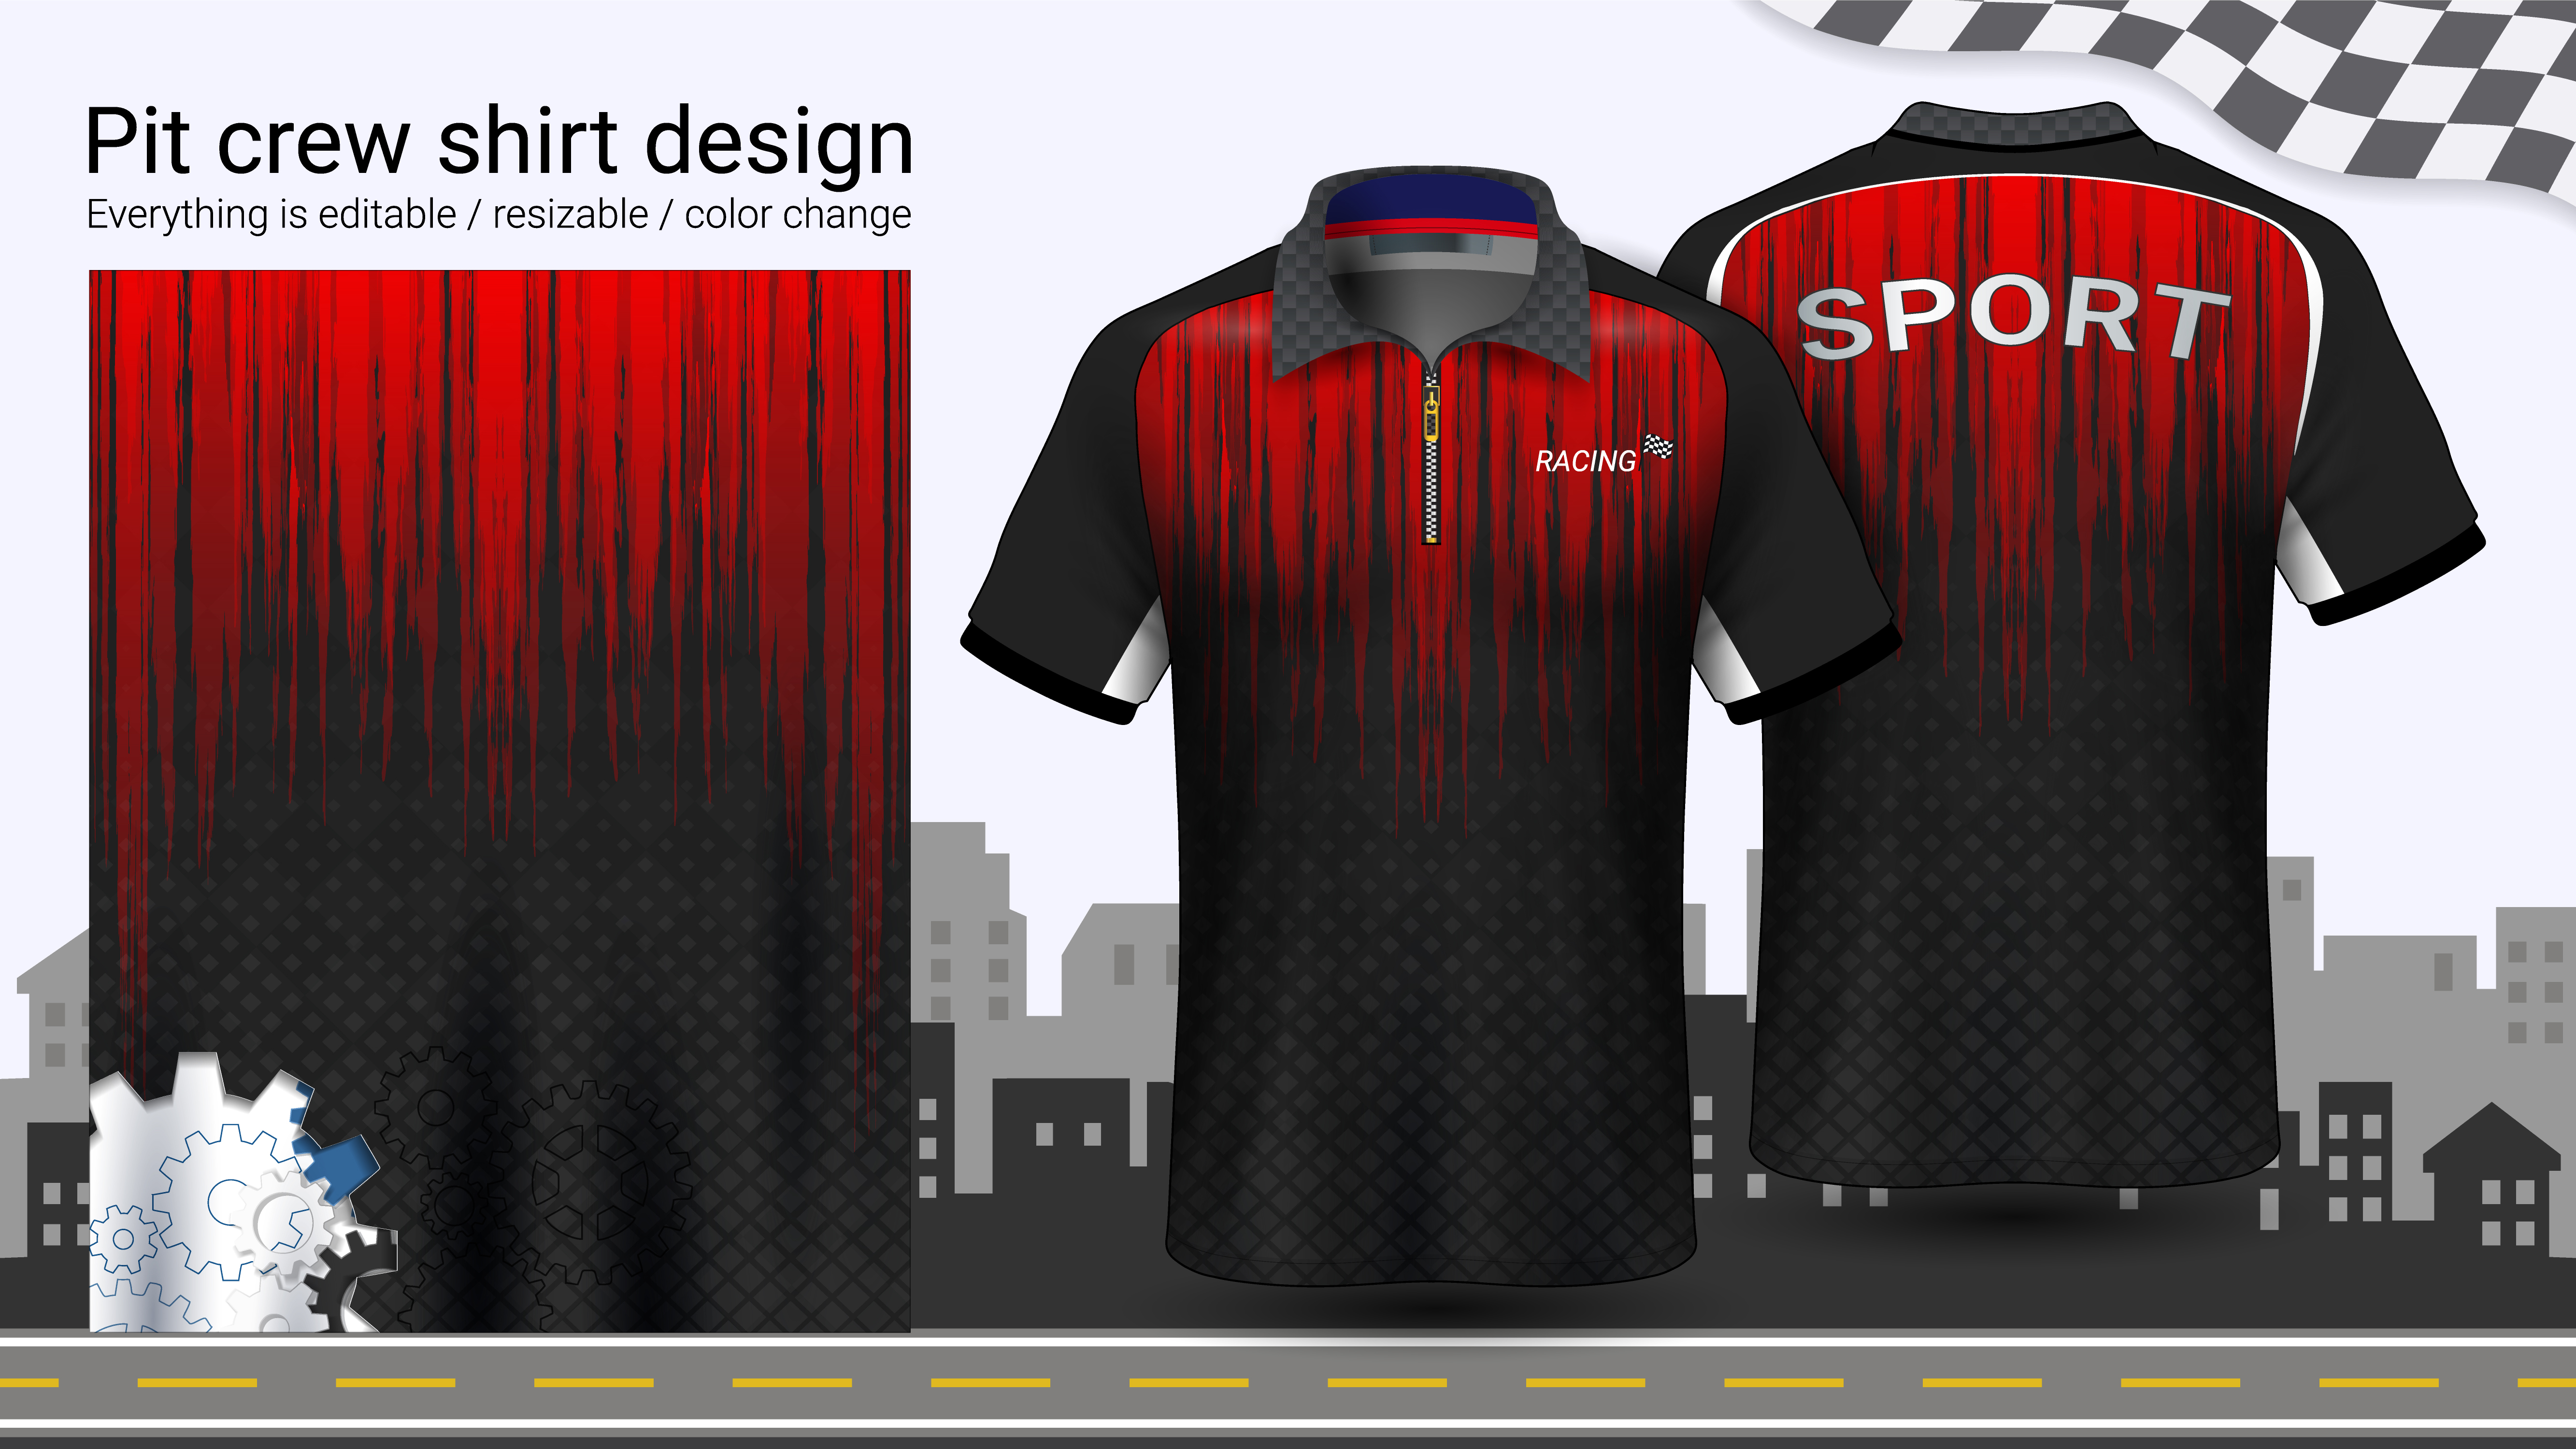 polo-t-shirt-with-zipper-racing-uniforms-mockup-template-for-active